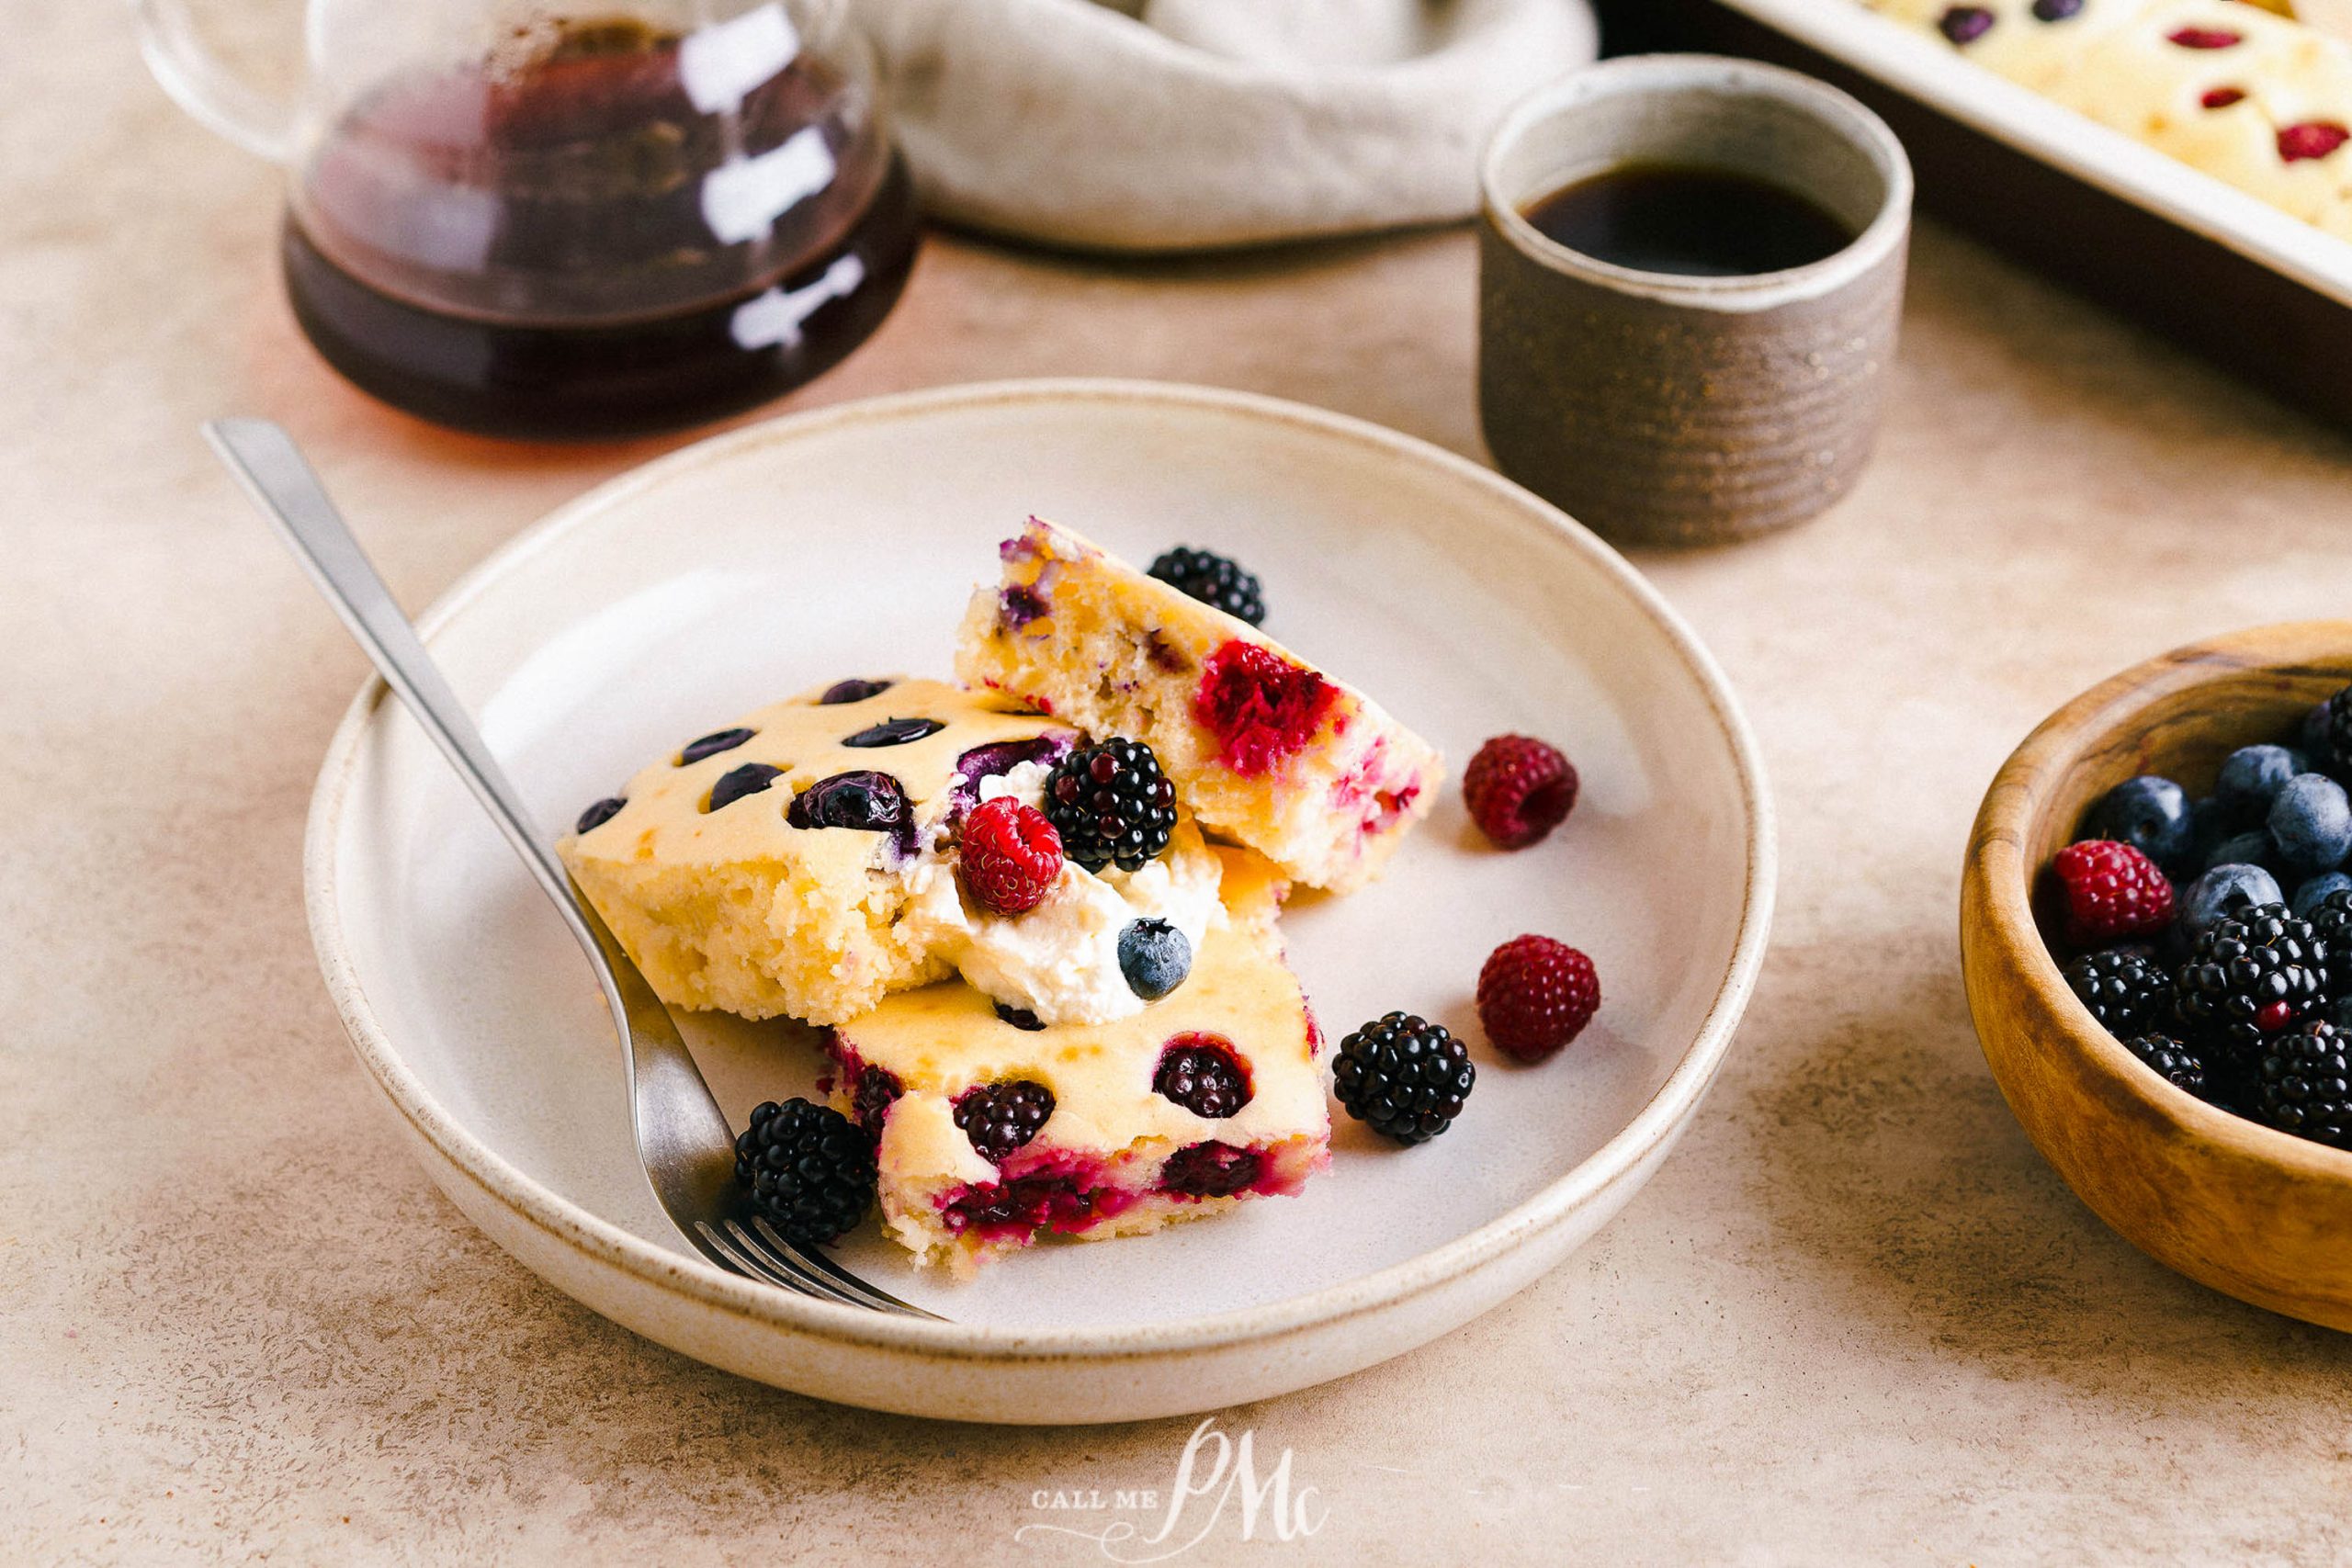 A plate of berry pancakes with berries and a cup of coffee.